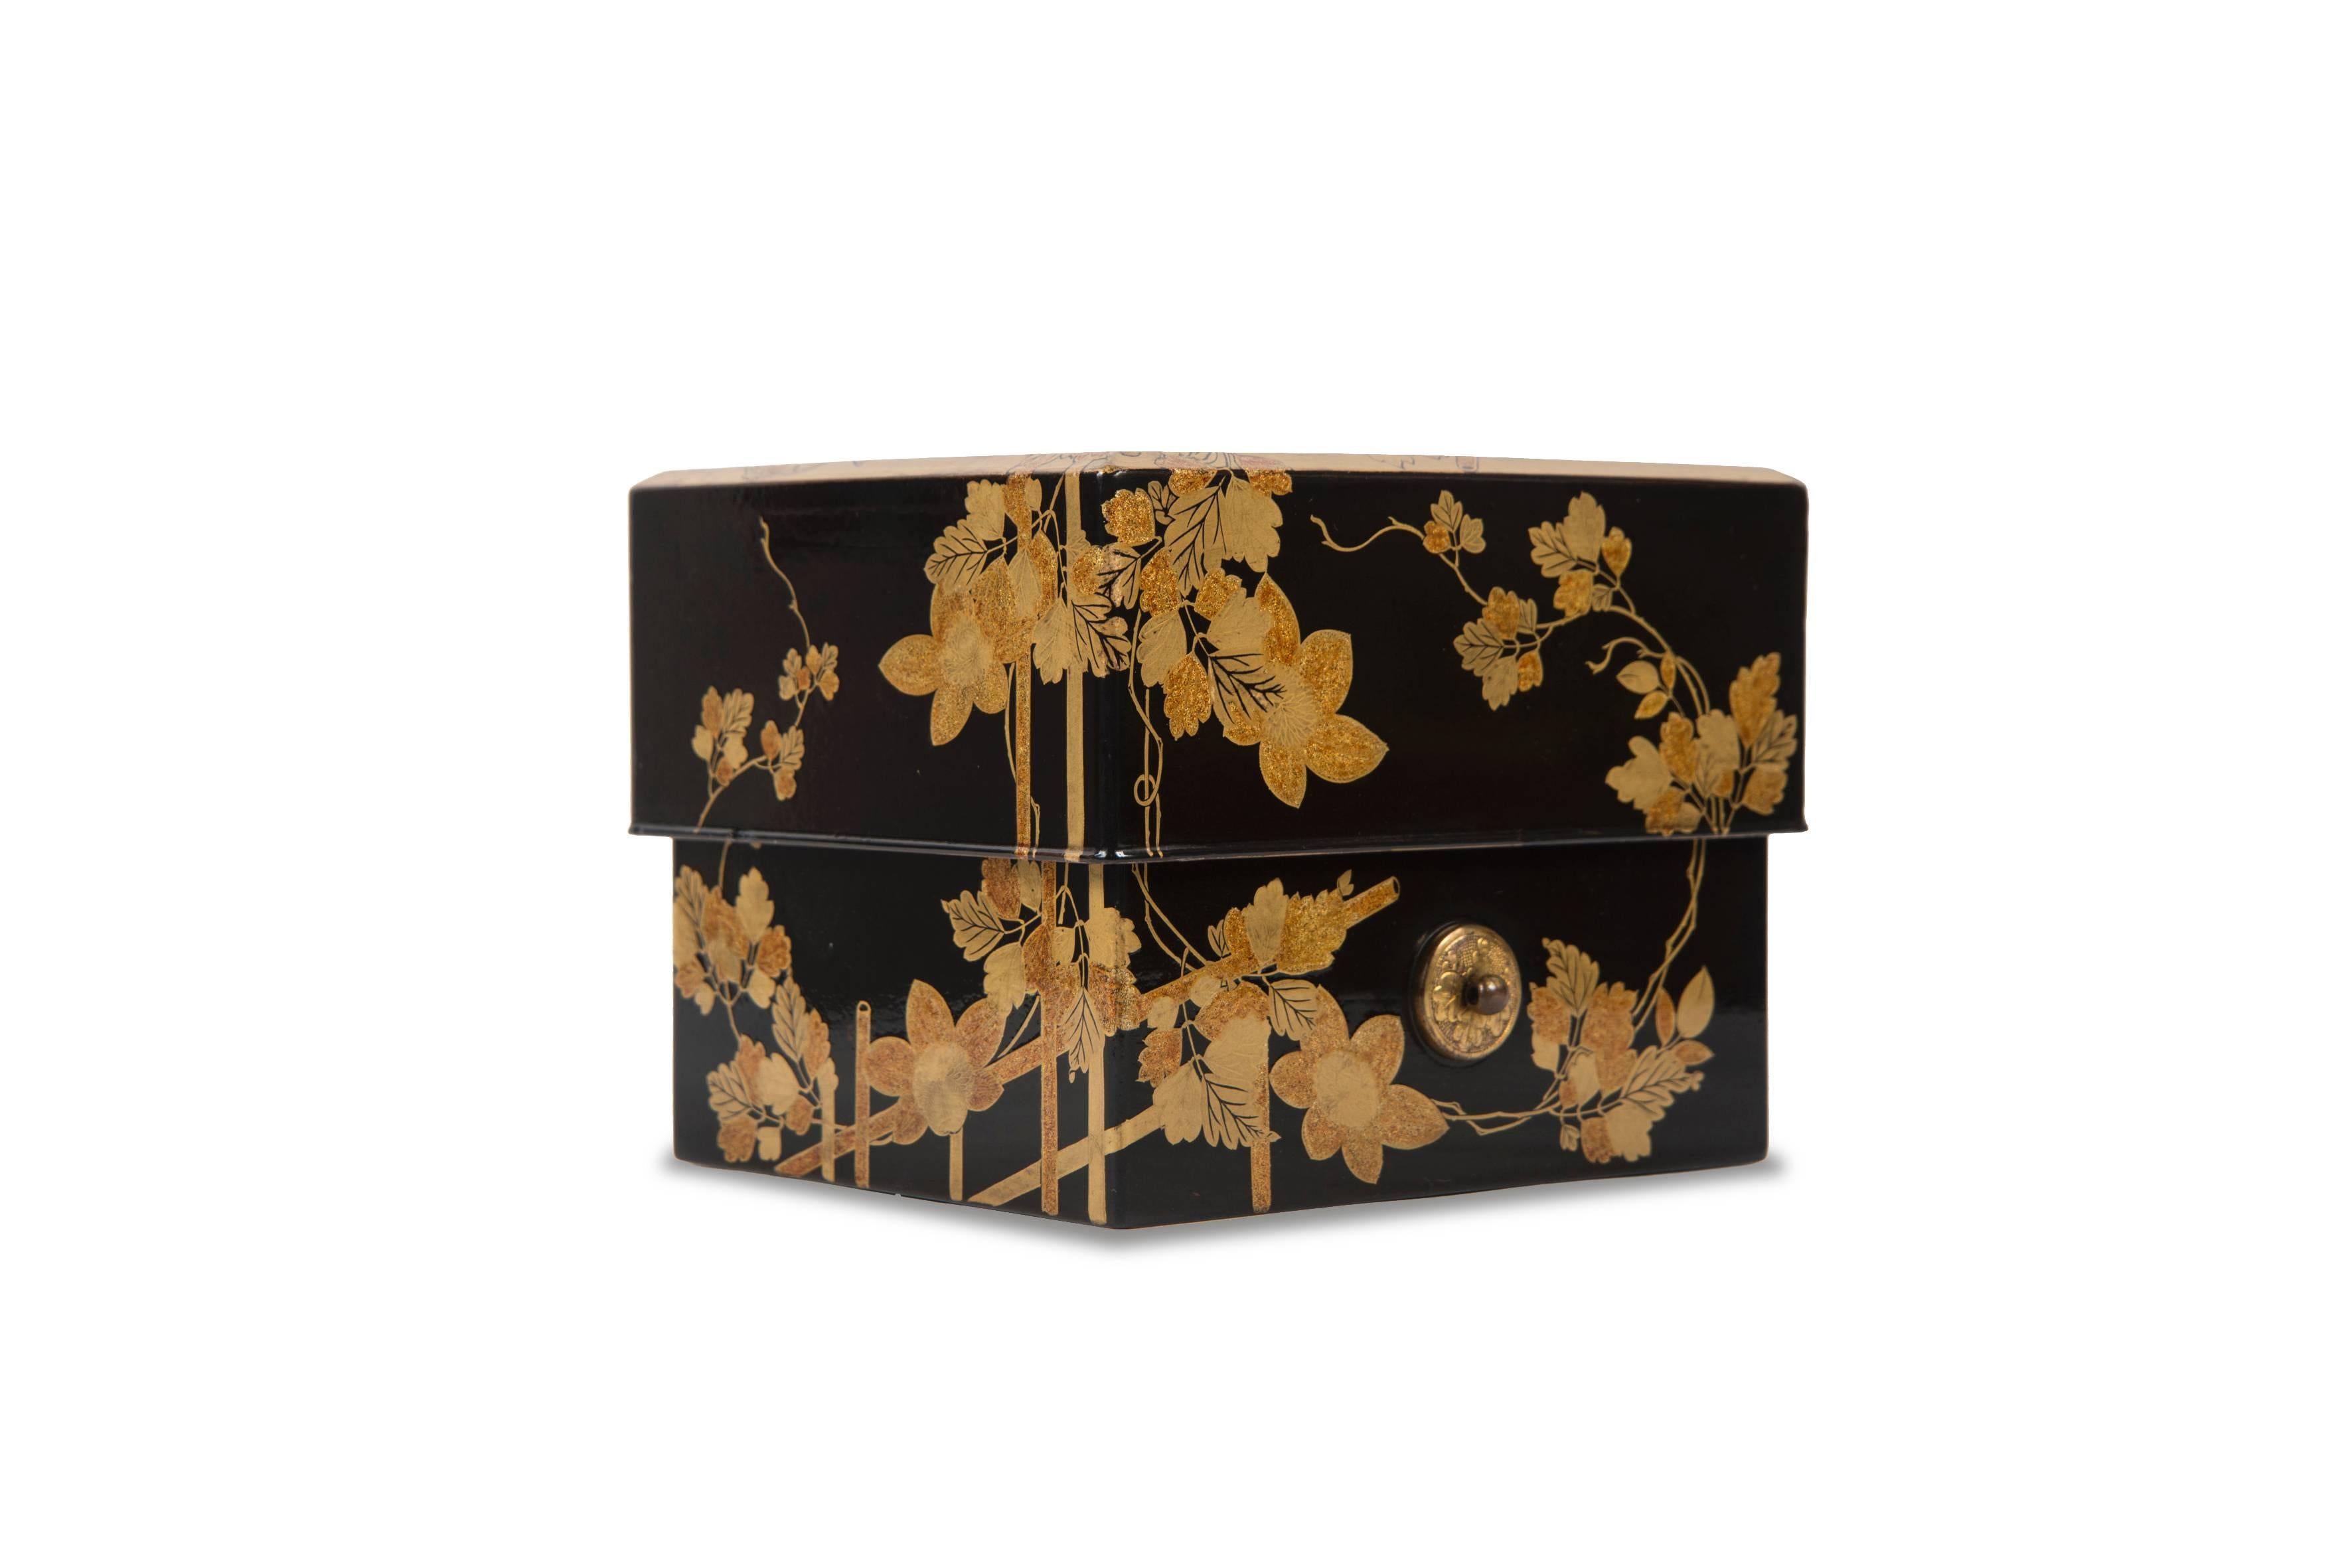 Black background lacquer box with a decor of foliage and flowers.
It contains a small tray supporting six assorted boxes with the symbols of the 